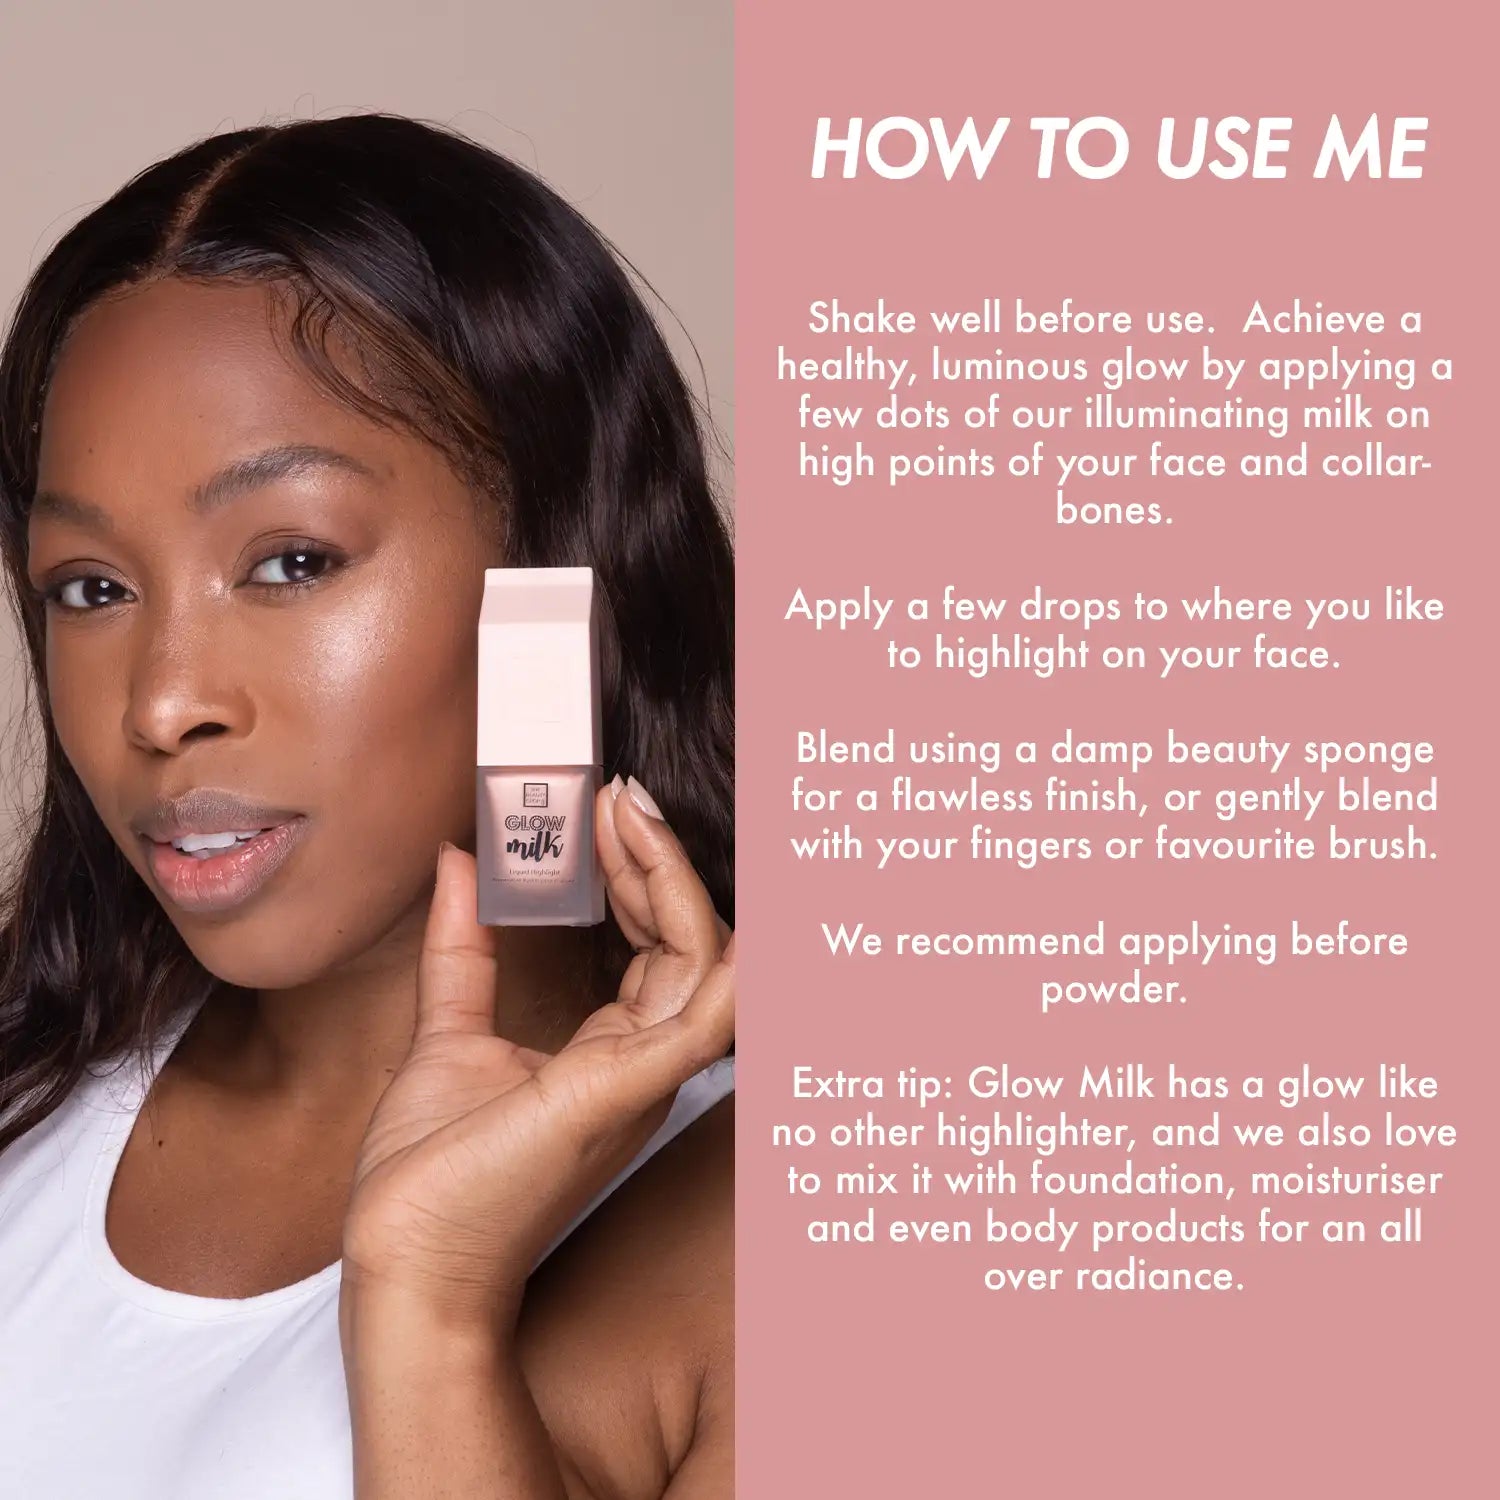 how to use me. extra tip: glow milk has a glow like no other highlighter, and we also love to mix it with foundation, moisturiser and even body products for an all over radiance.